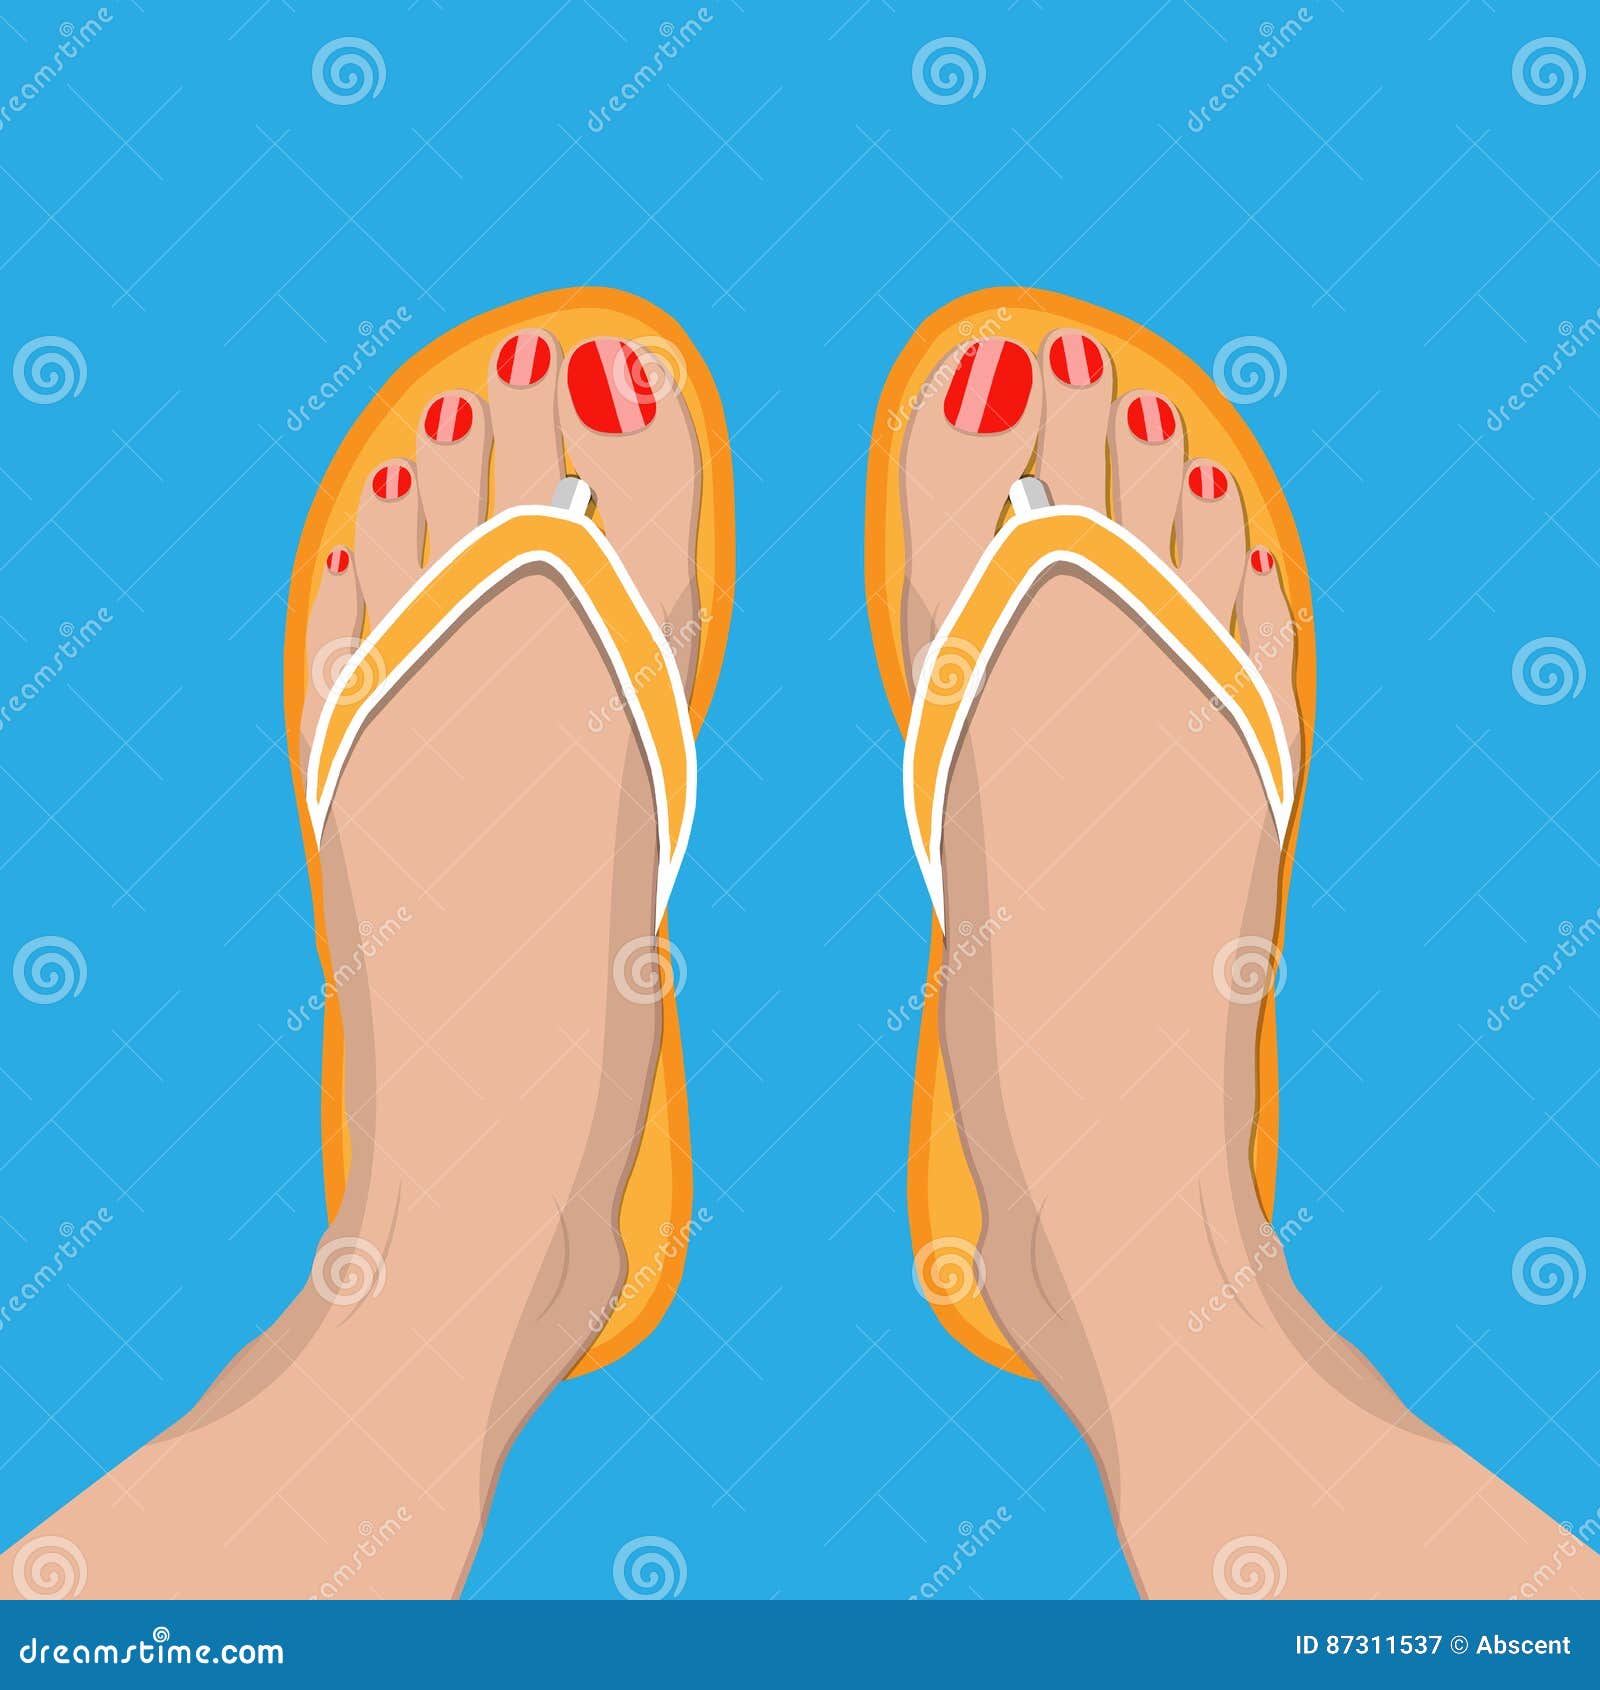 Female Feet With Red Pedicure In Summer Flip Flops Stock Vector Illustration Of Icon Flat